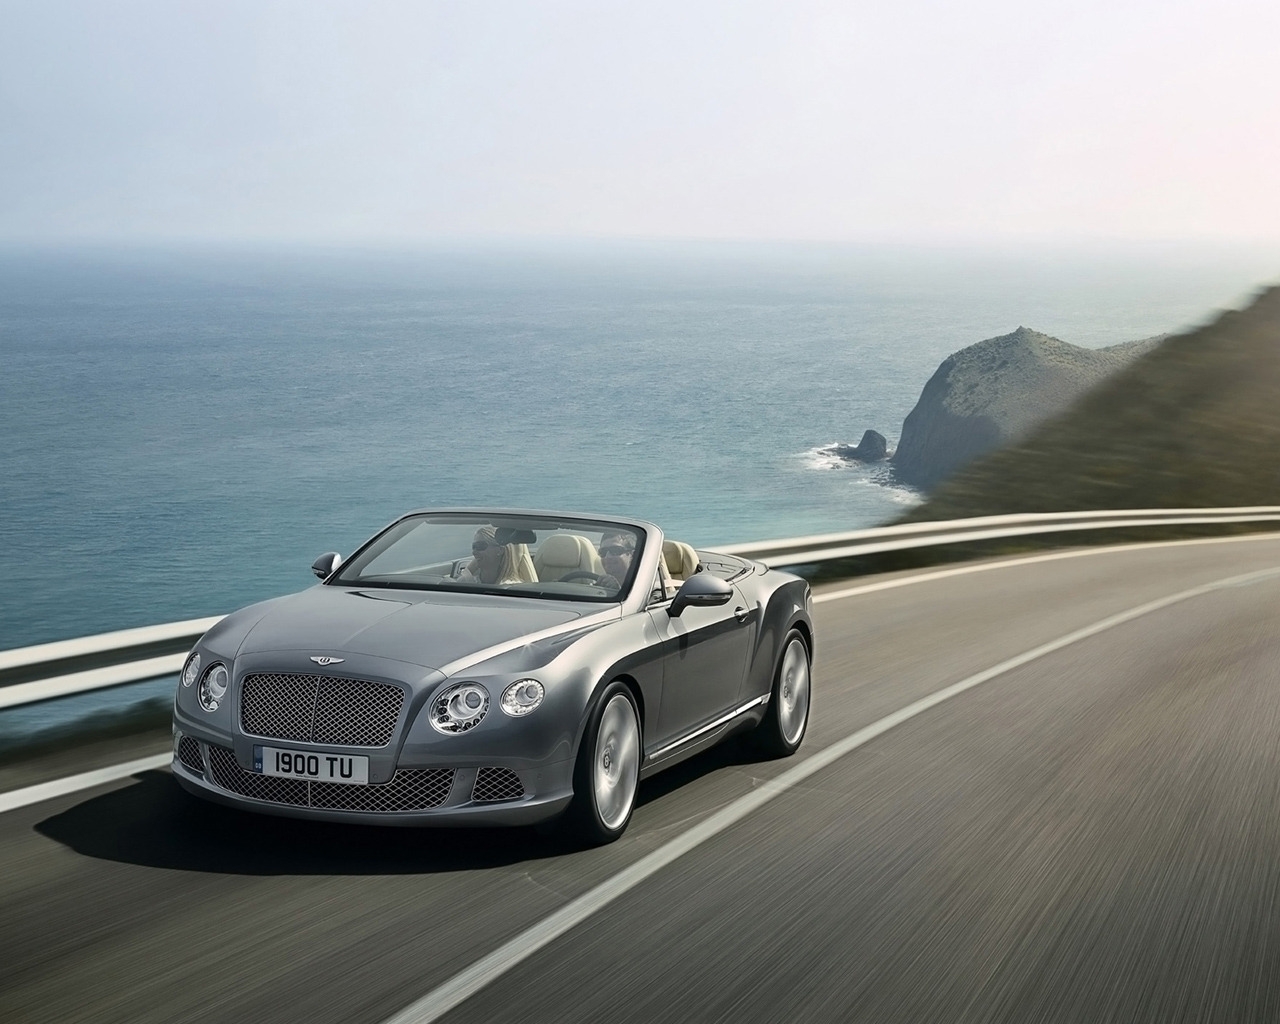 2012 Bentley Continental GTC for 1280 x 1024 resolution